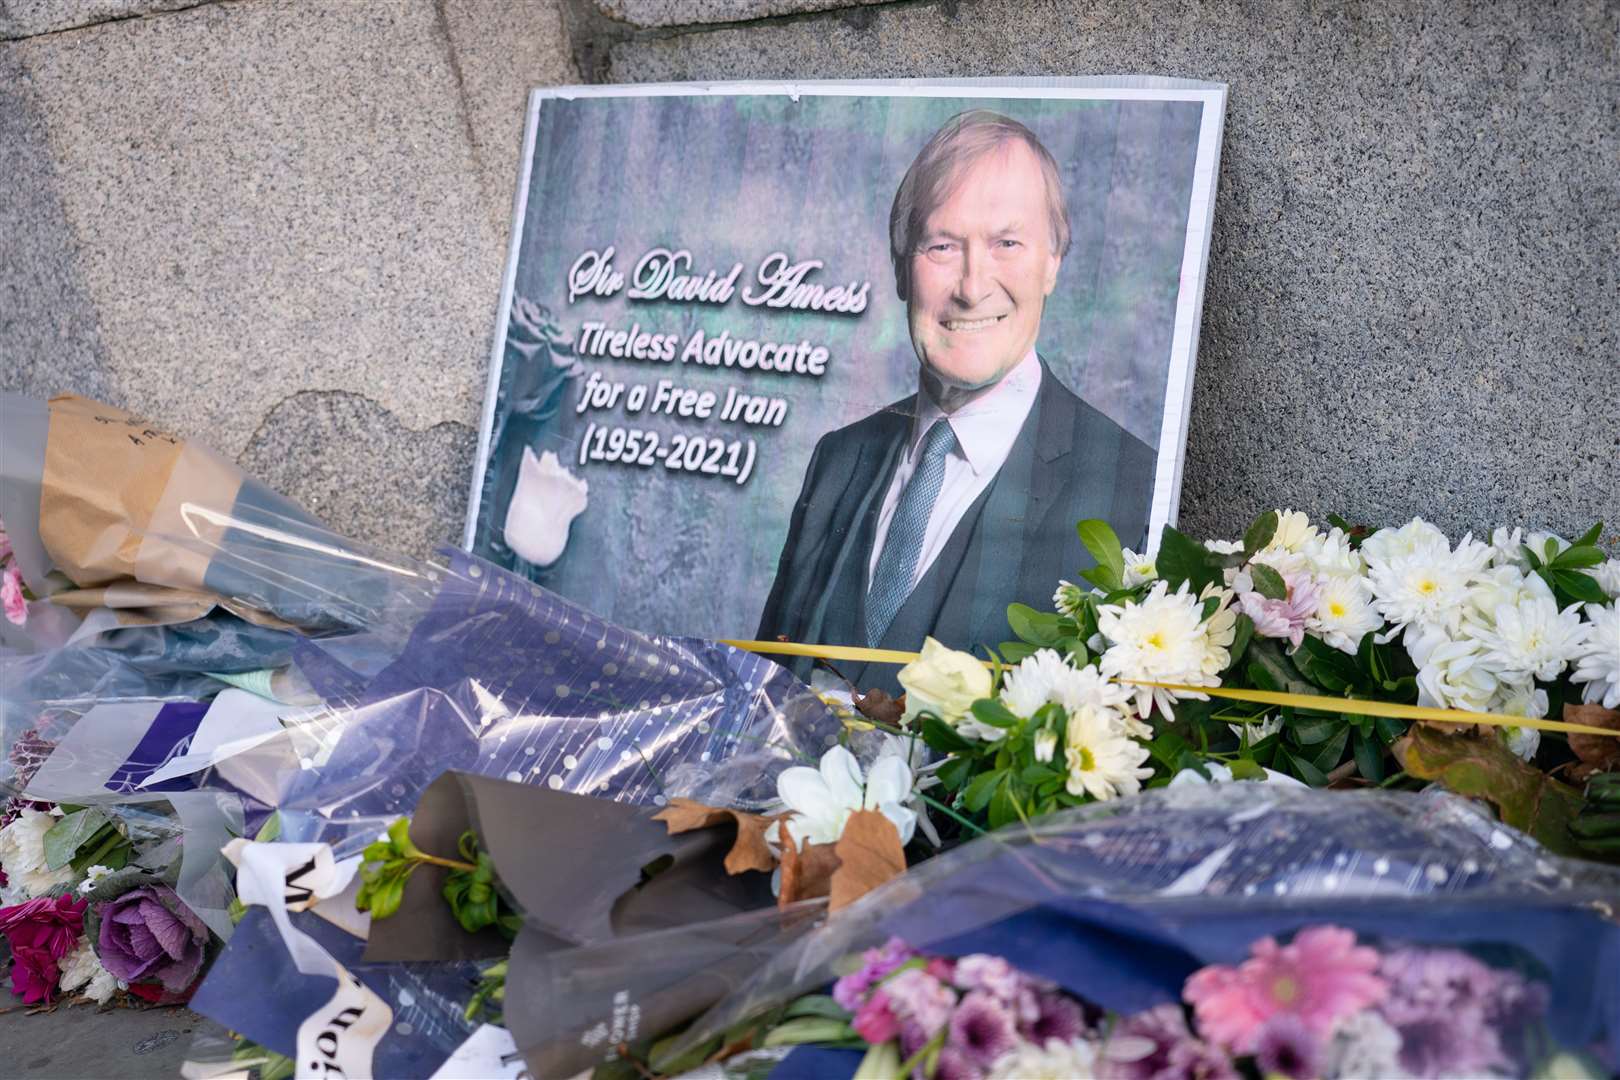 Prevent came under renewed scrutiny after Sir David Amess was stabbed to death in October 2021 by Ali Harbi Ali, who said he was motivated by Islamist extremism (Dominic Lipinski/PA)